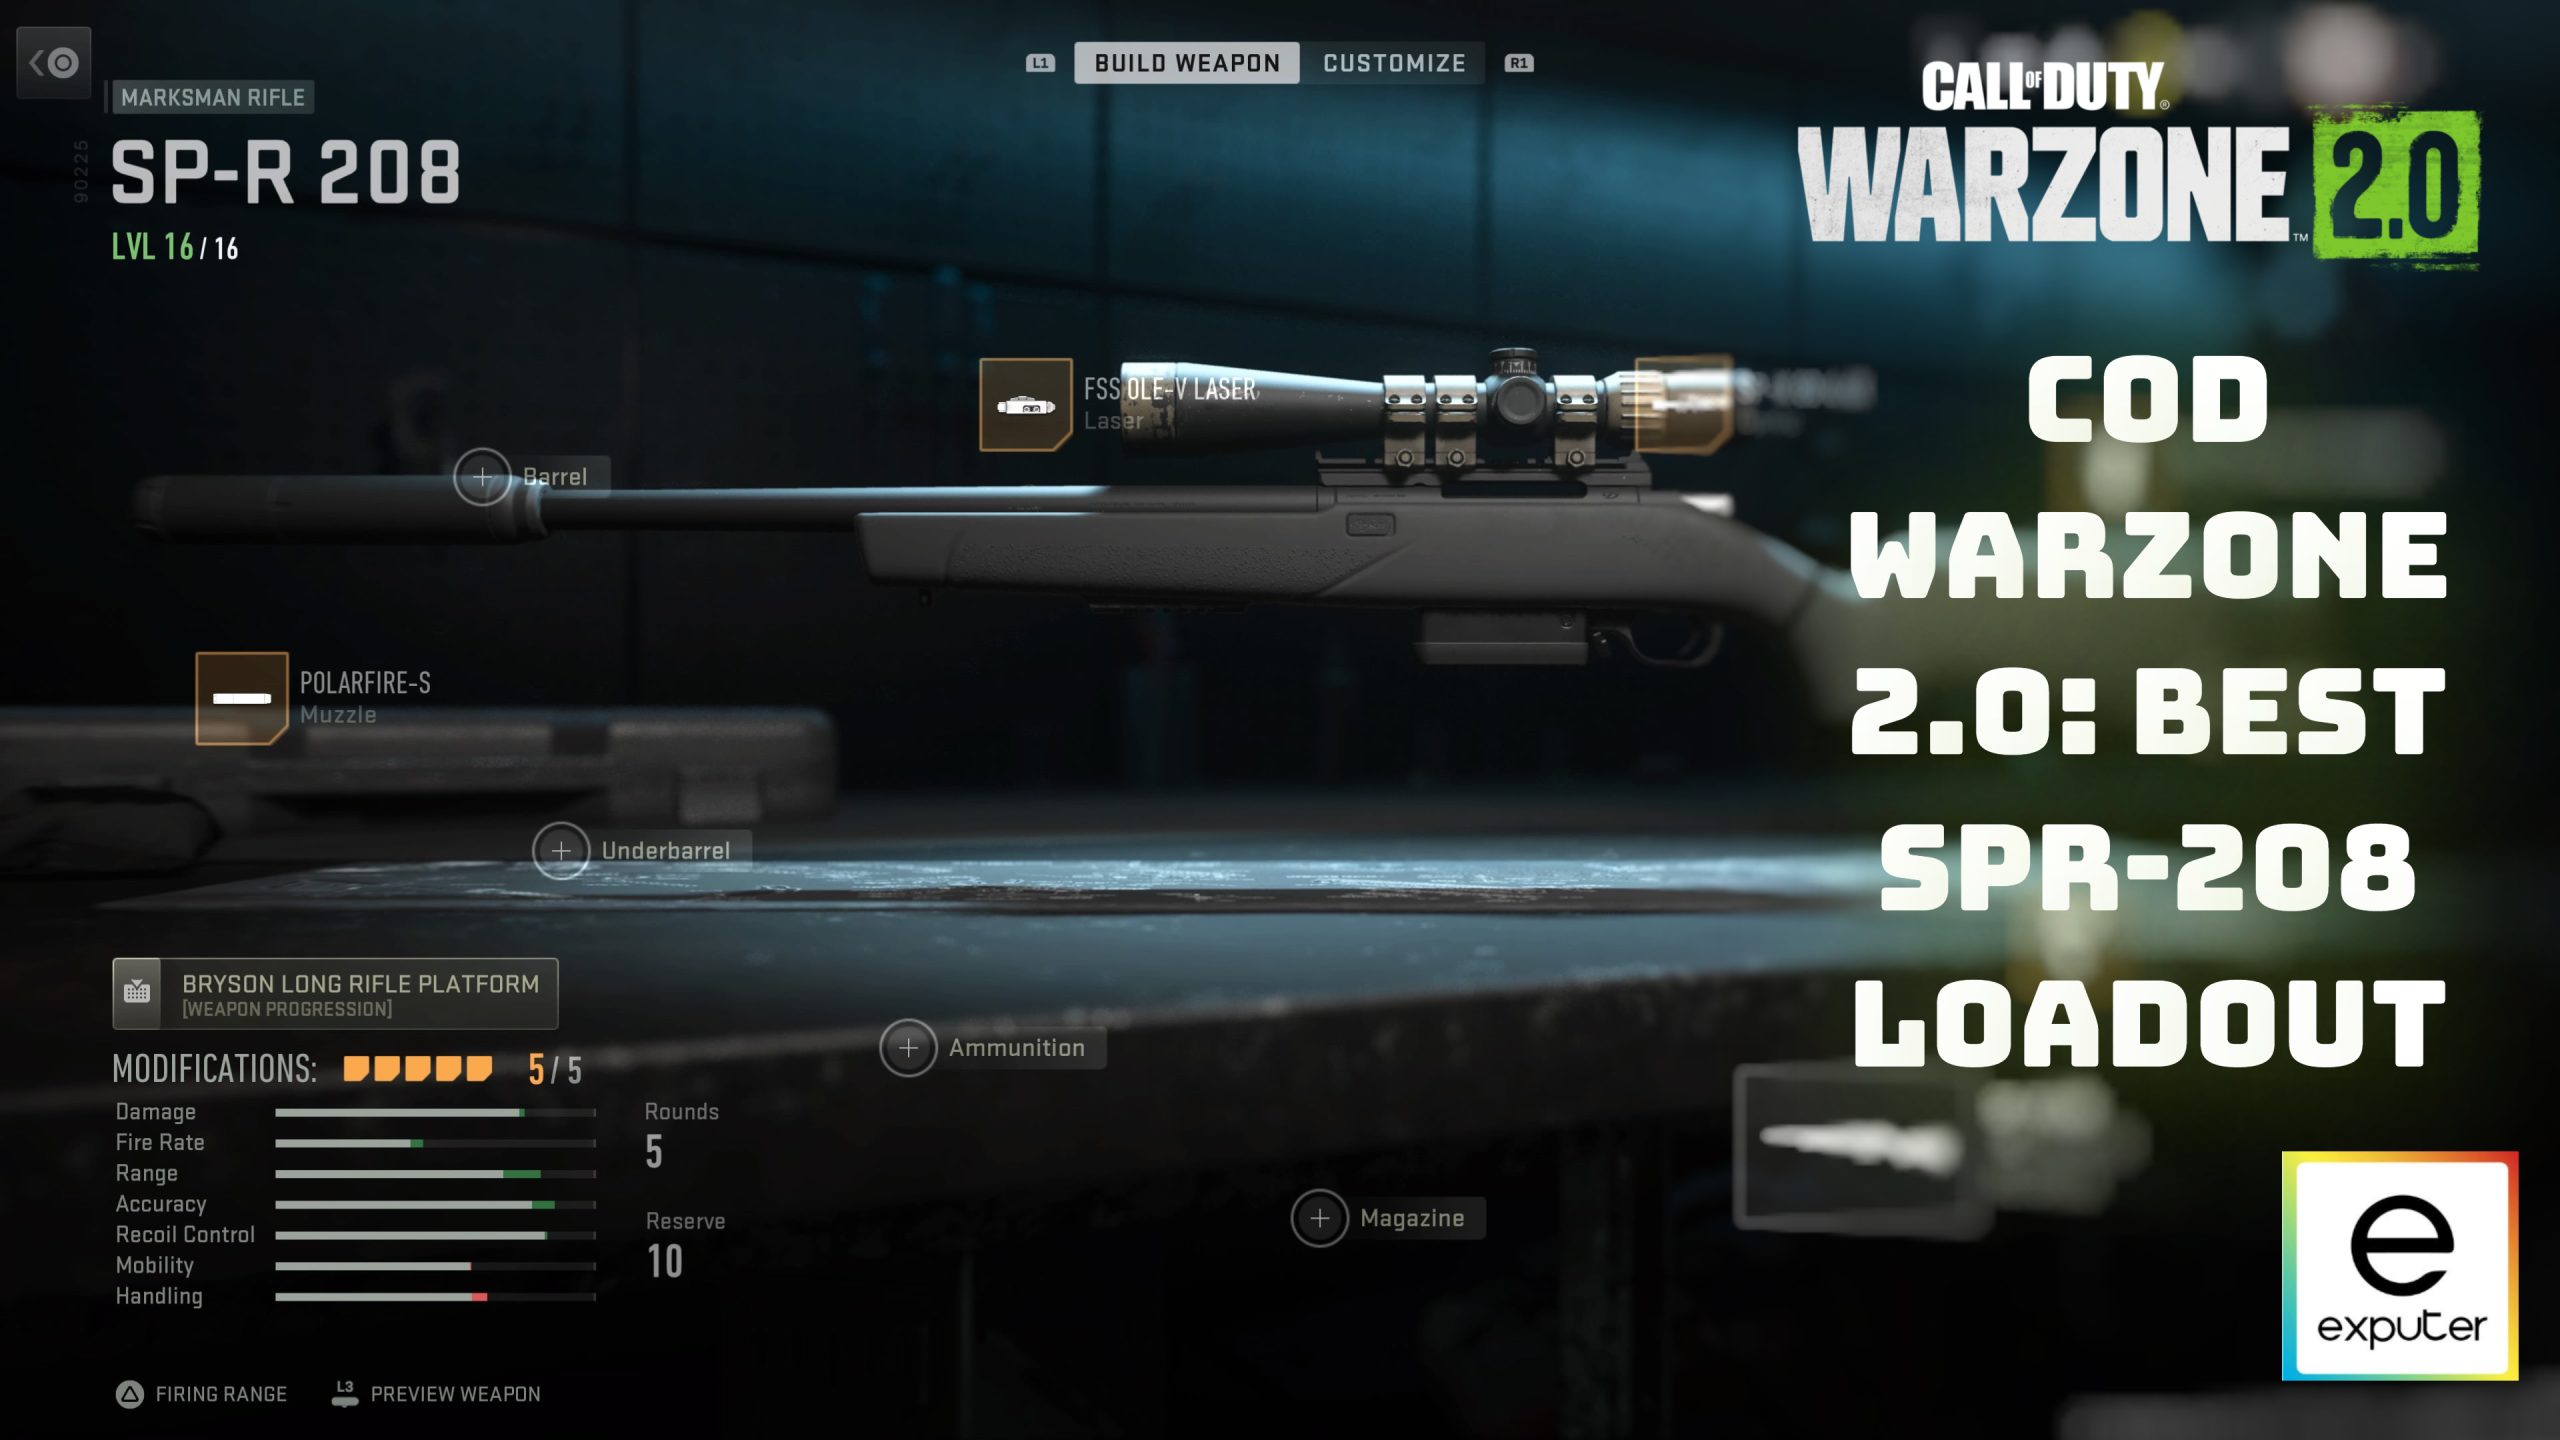 Featured image for COD Warzone 2.0 Best SPR-208 Loadout